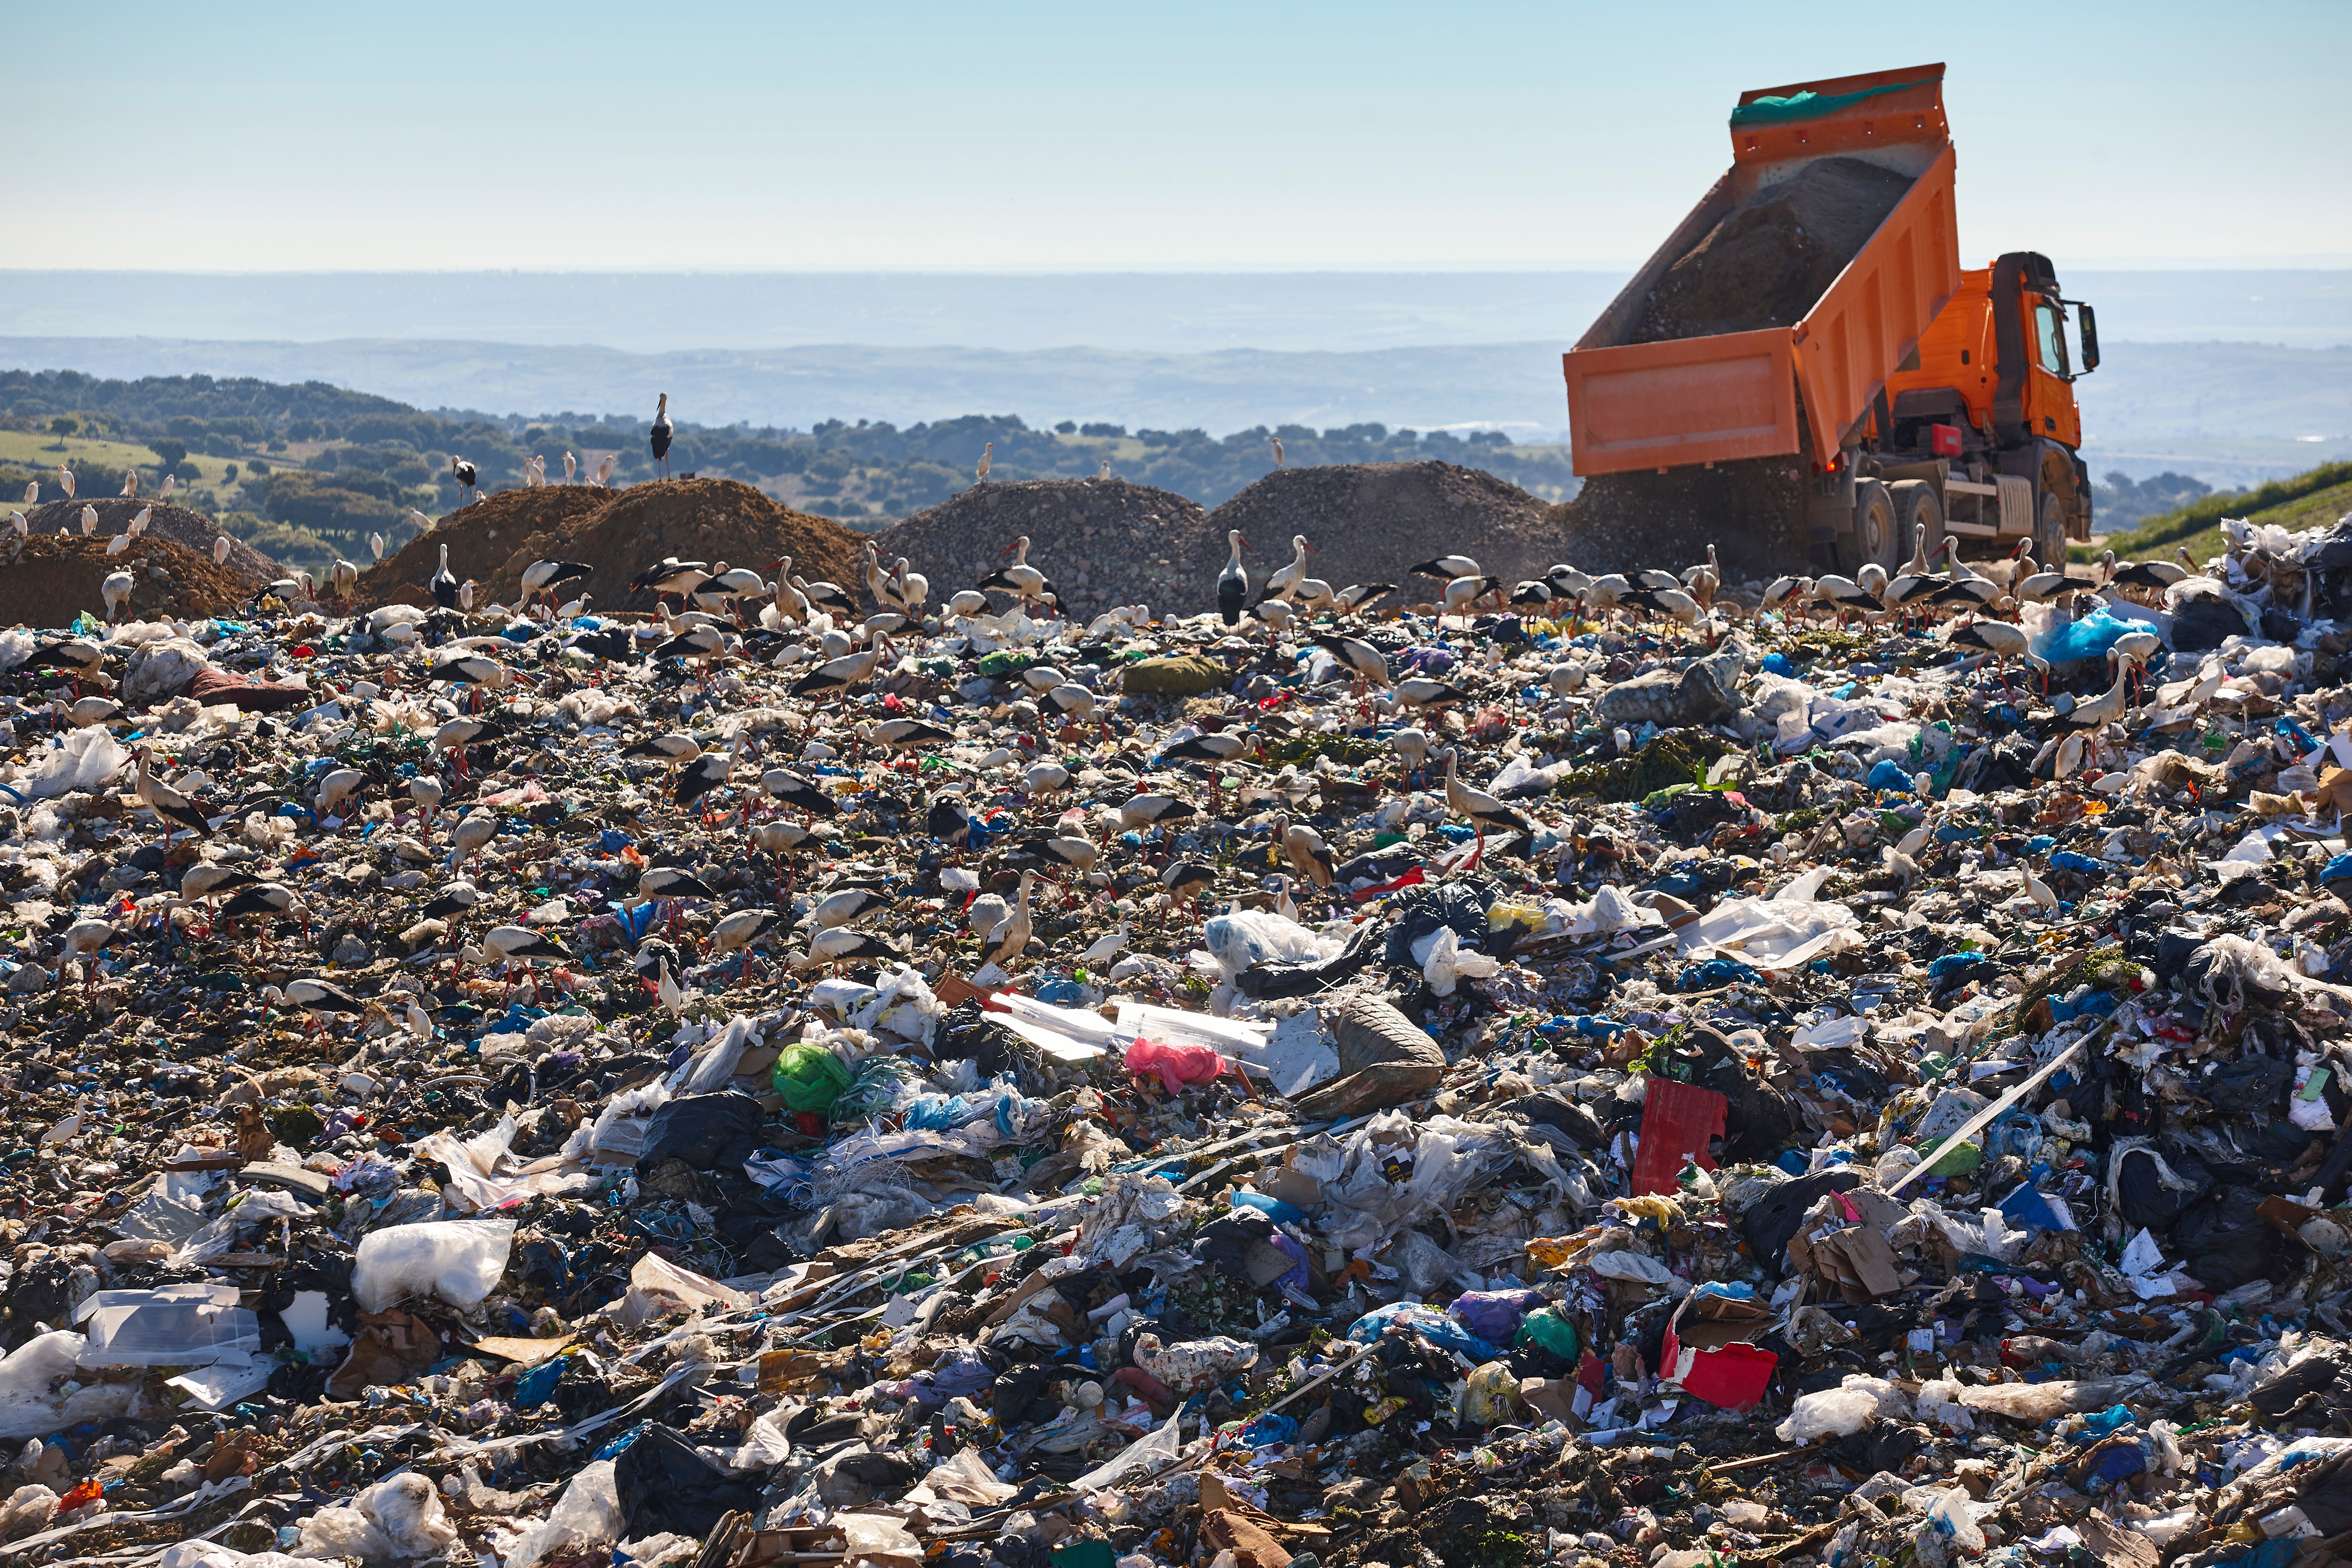 Landfills must be managed properly to prevent contamination@3x.webp